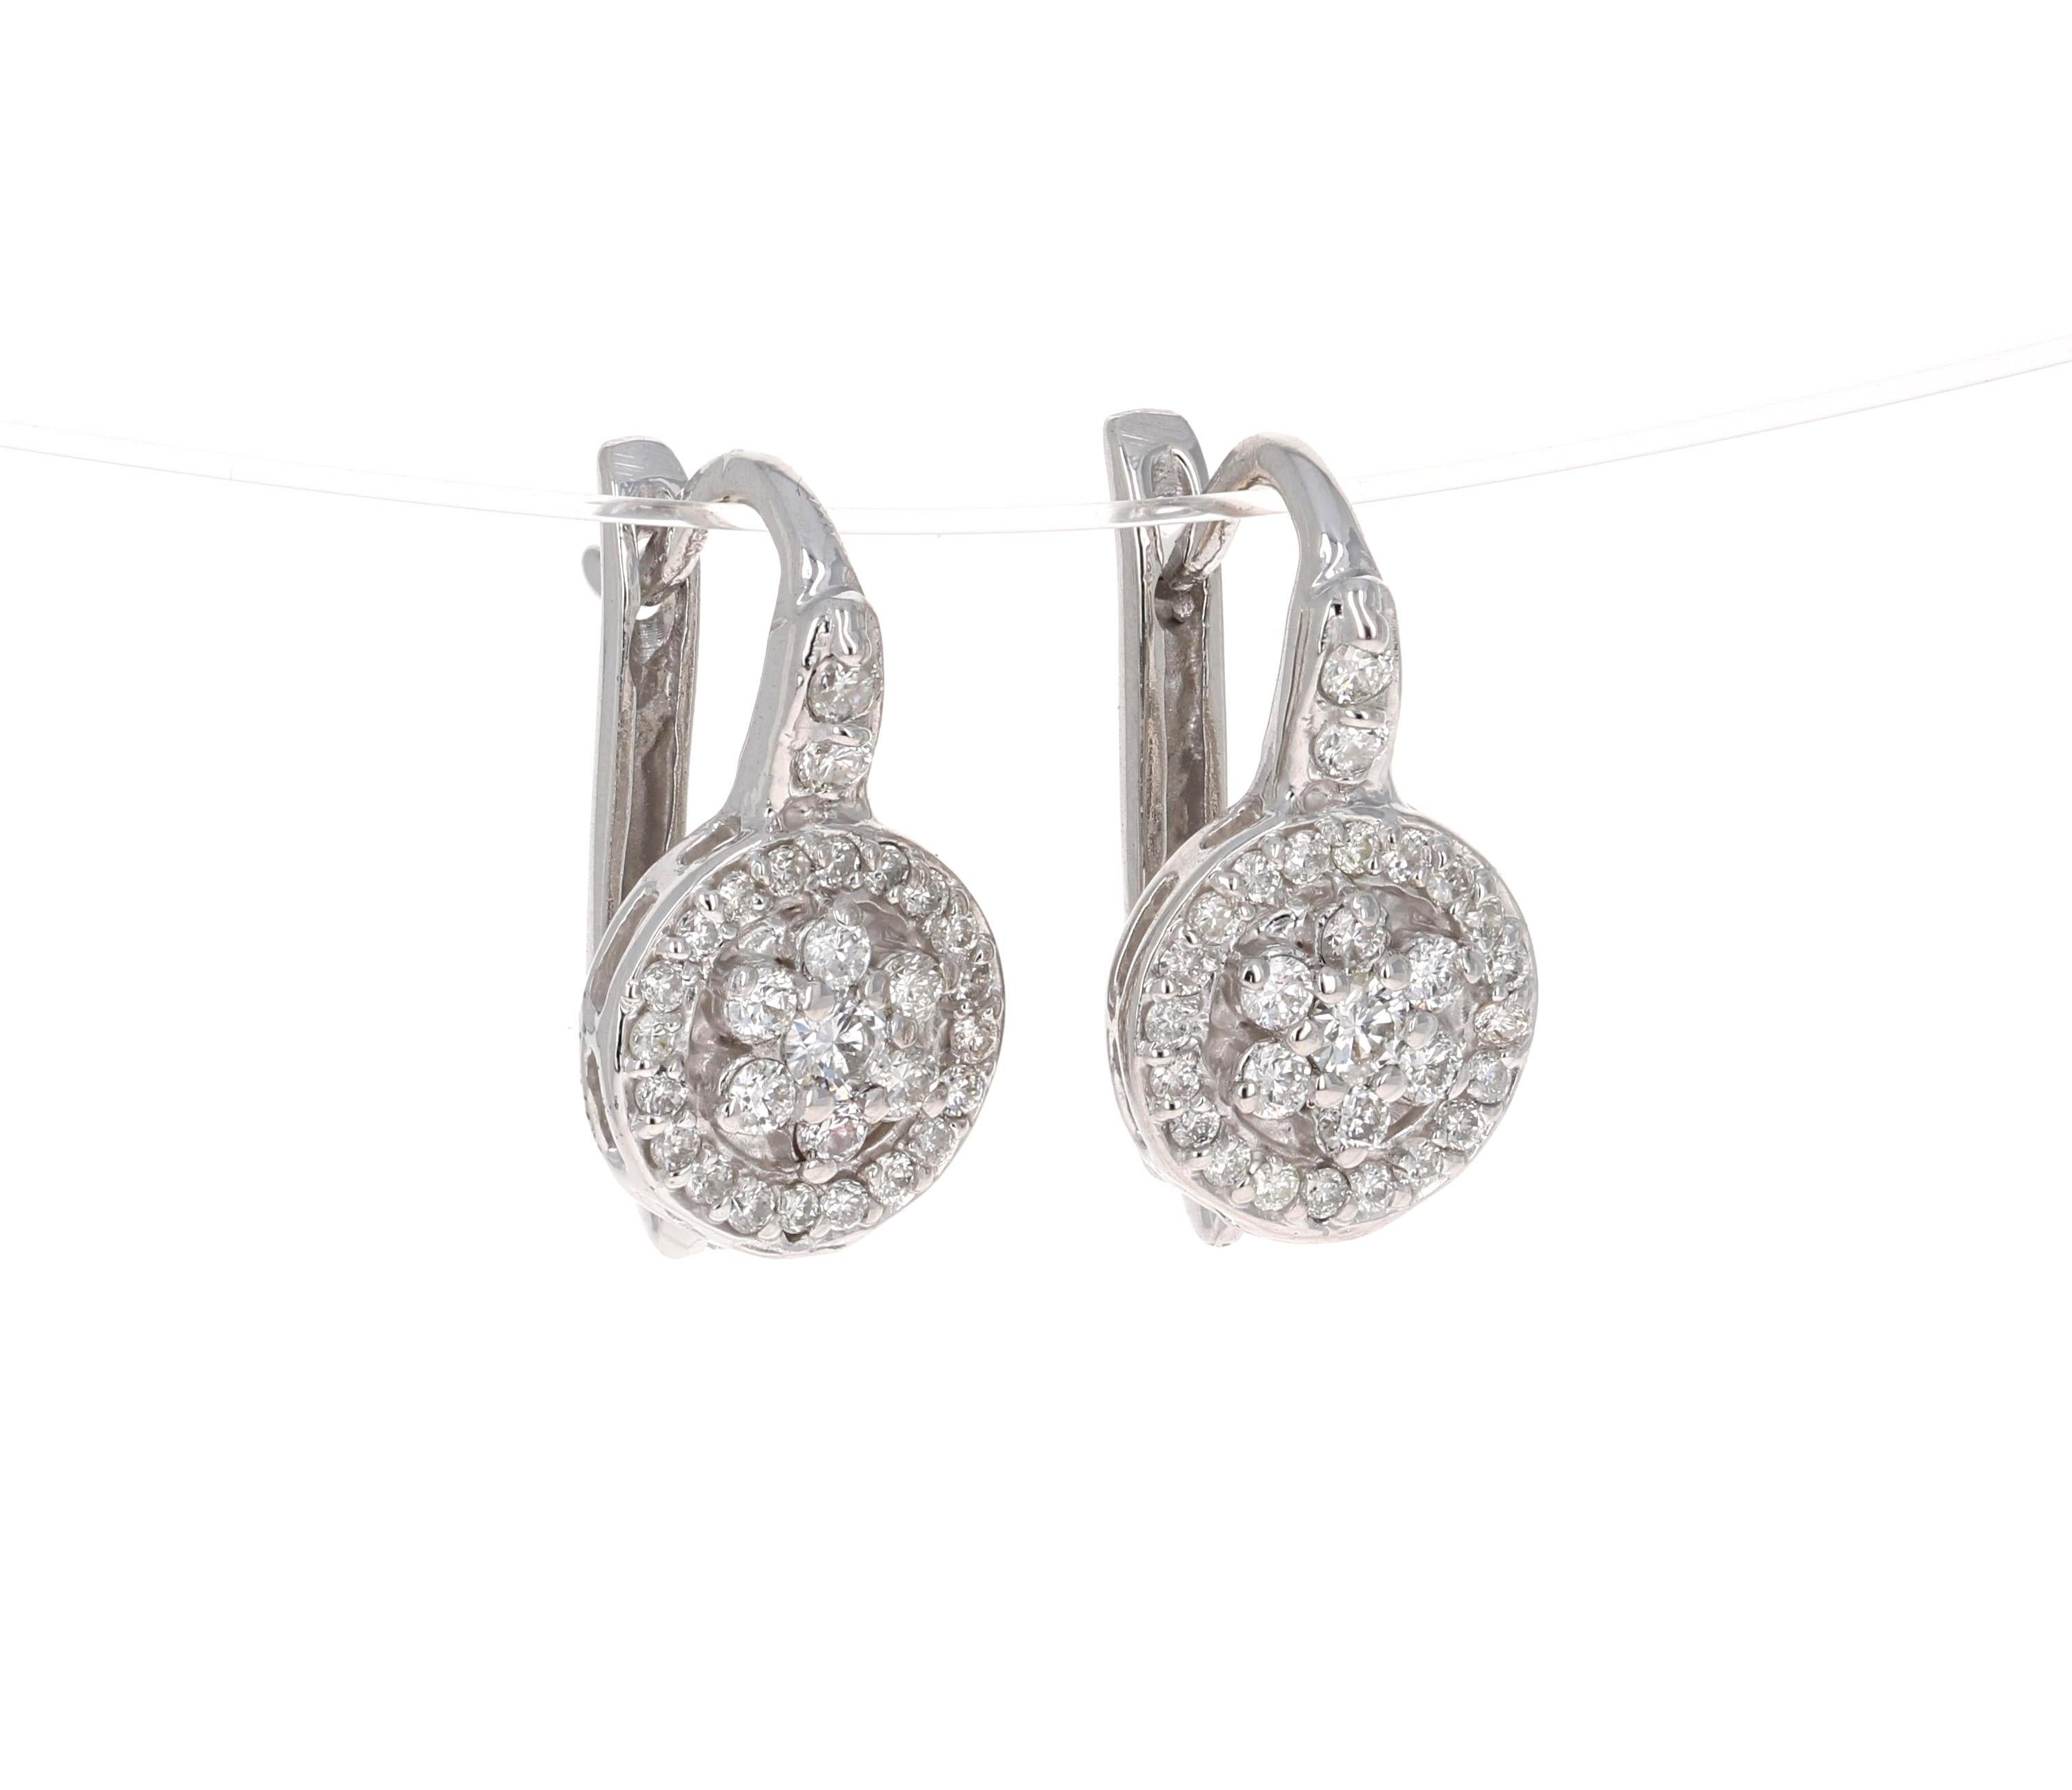 
0.72 Carat Round Diamond Floret Design 14K White Gold Earrings!

This classic design of diamond earrings have 58 Round Cut Diamonds that weigh 0.72 Carats. The Clarity of the diamonds is SI2 and the Color is F. The Earrings have a latch back